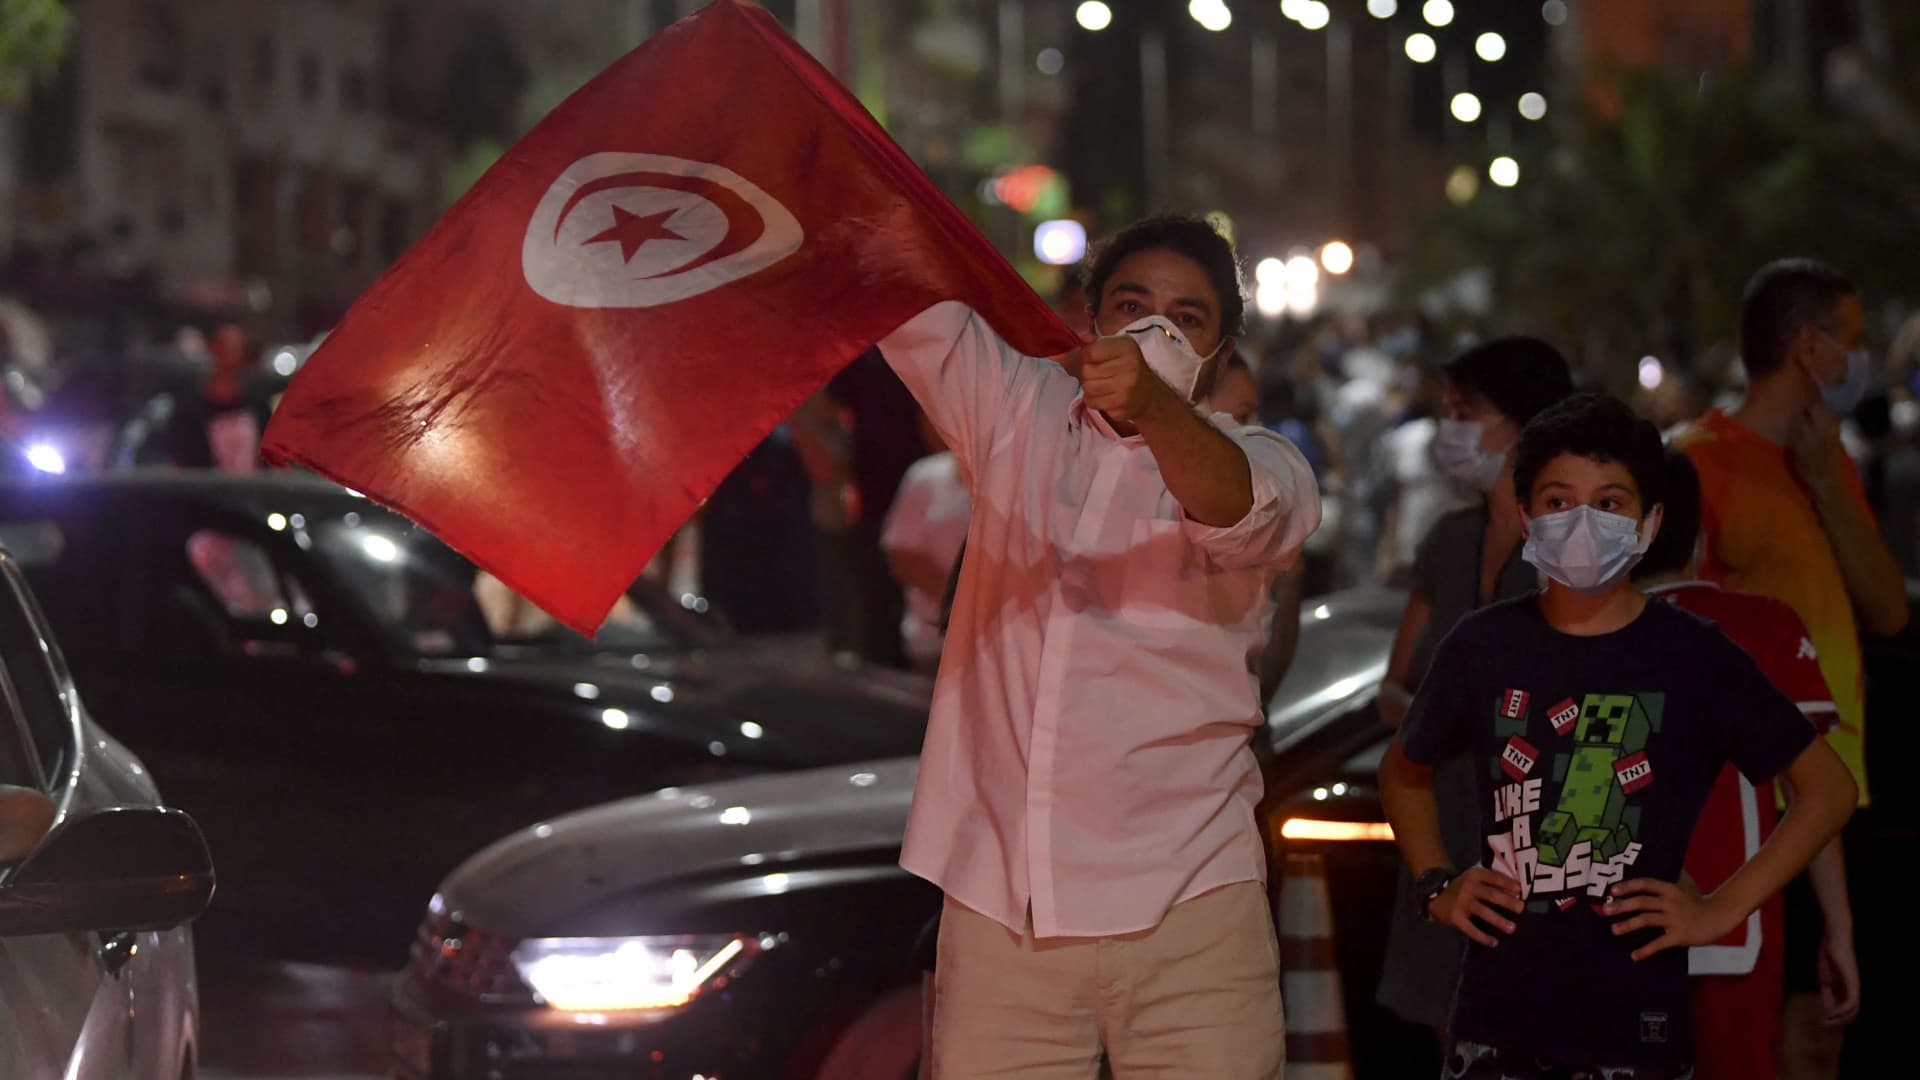 People celebrate in the street after Tunisian President Kais Saied announced the suspension of parliament and the dismissal of the prime minister in Tunis on July 25, 2021, after a day of nationwide protest.